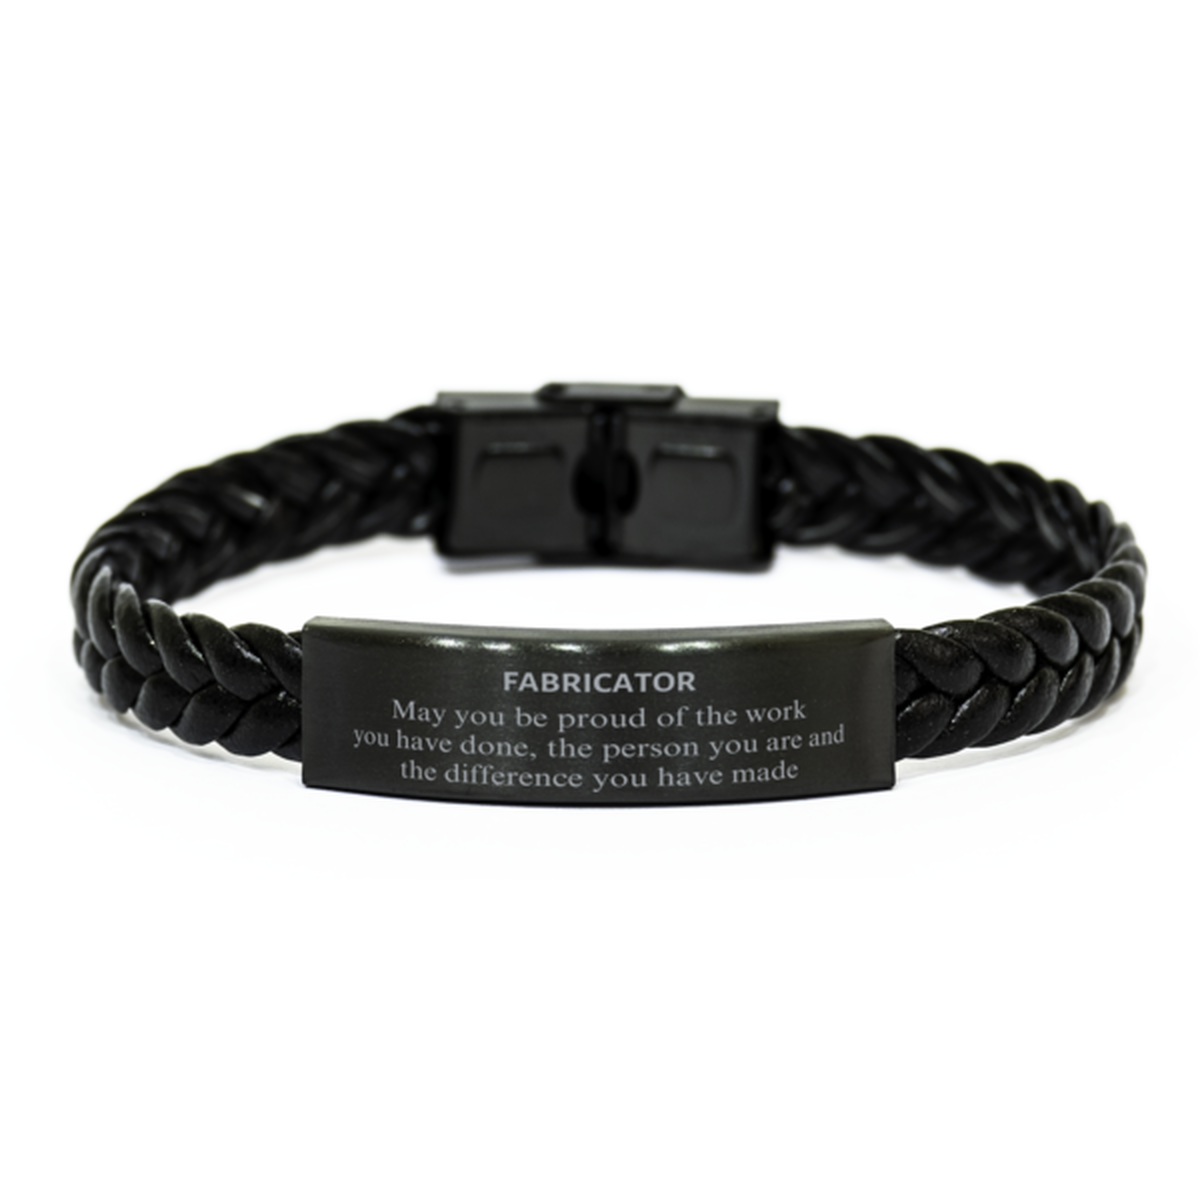 Fabricator May you be proud of the work you have done, Retirement Fabricator Braided Leather Bracelet for Colleague Appreciation Gifts Amazing for Fabricator